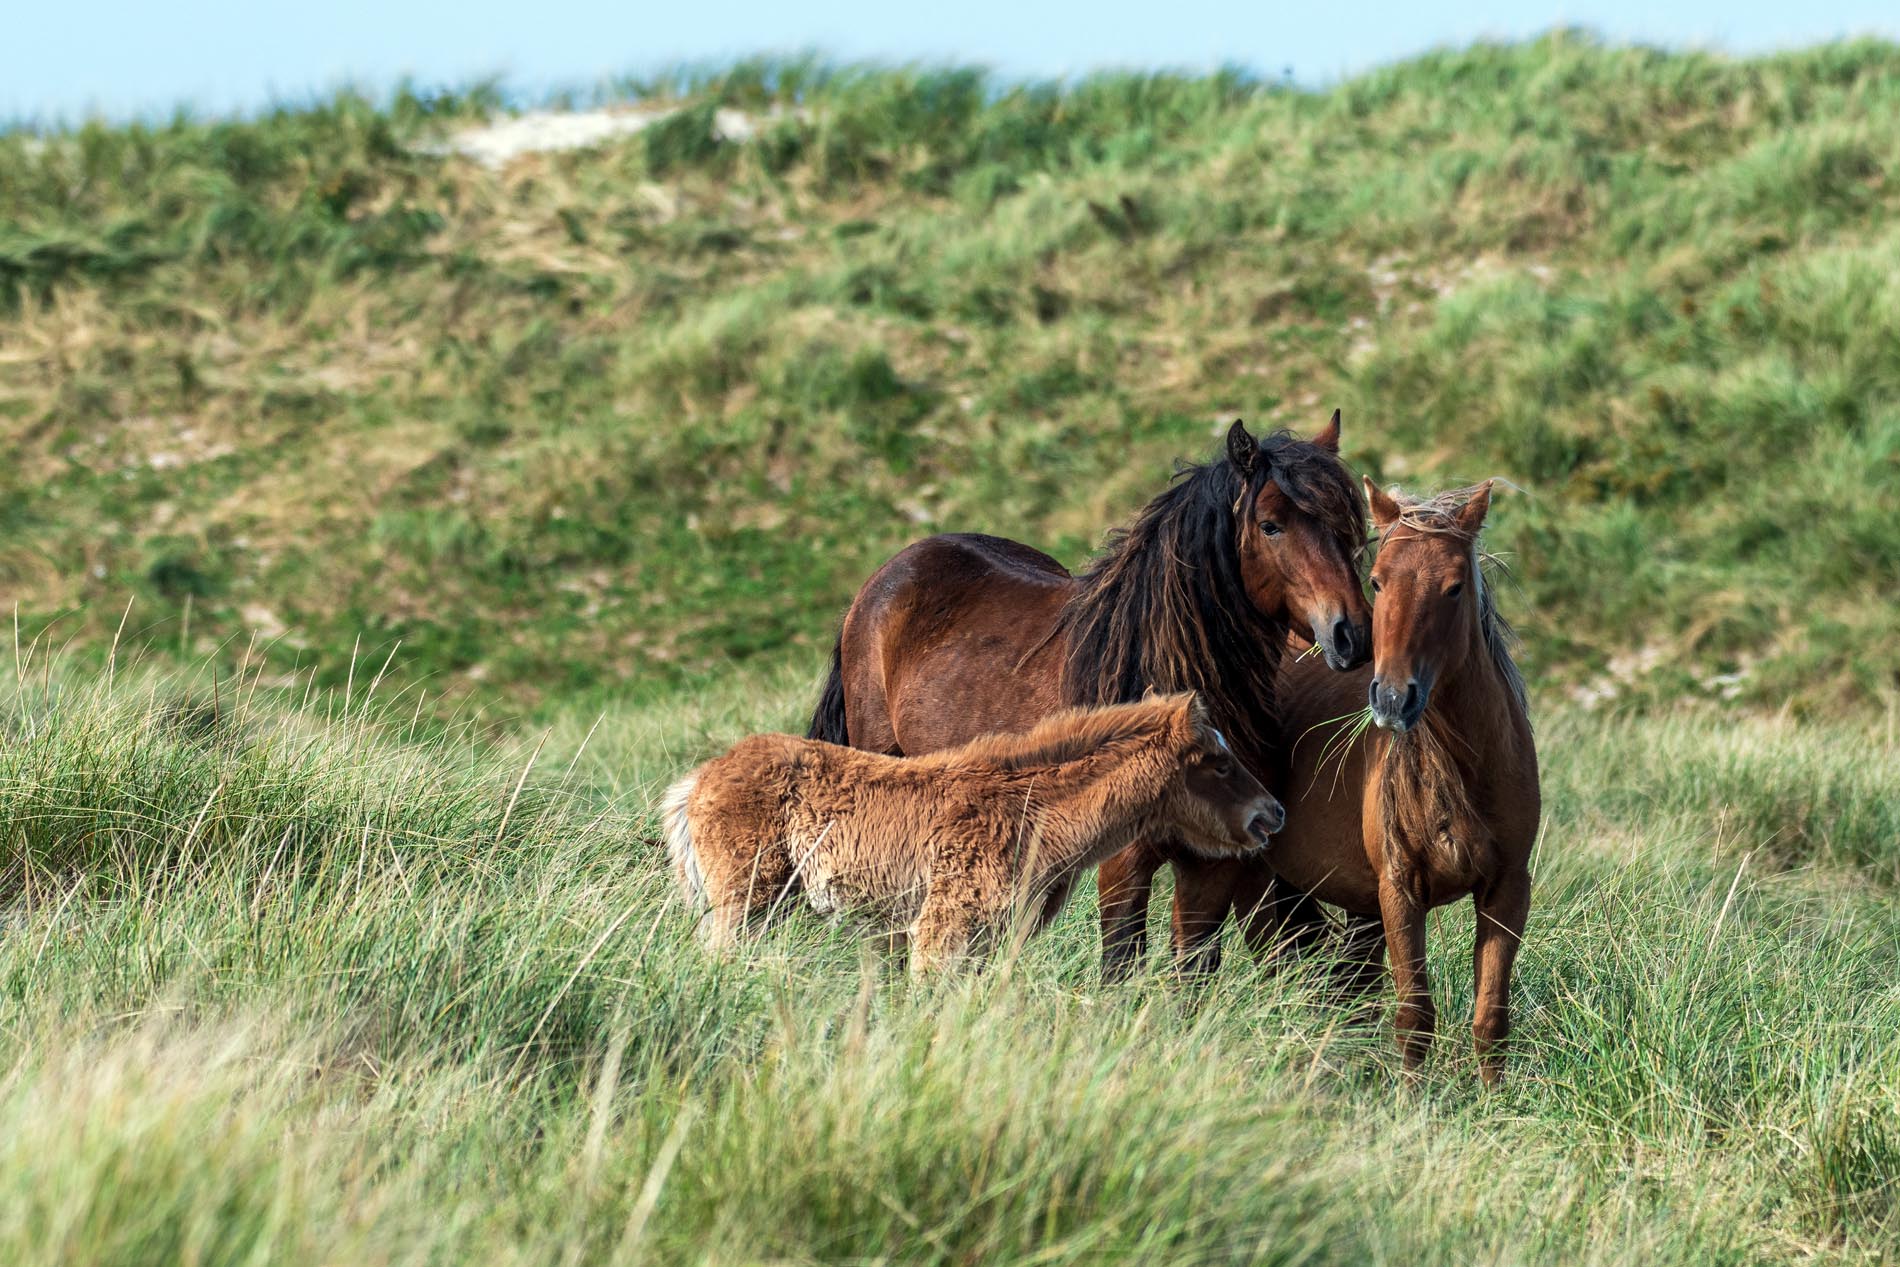 A family band of wild horses walk the grassy dunes on Sable Island, Nova Scotia - photo by Picture Perfect Tours and Geordie Mott